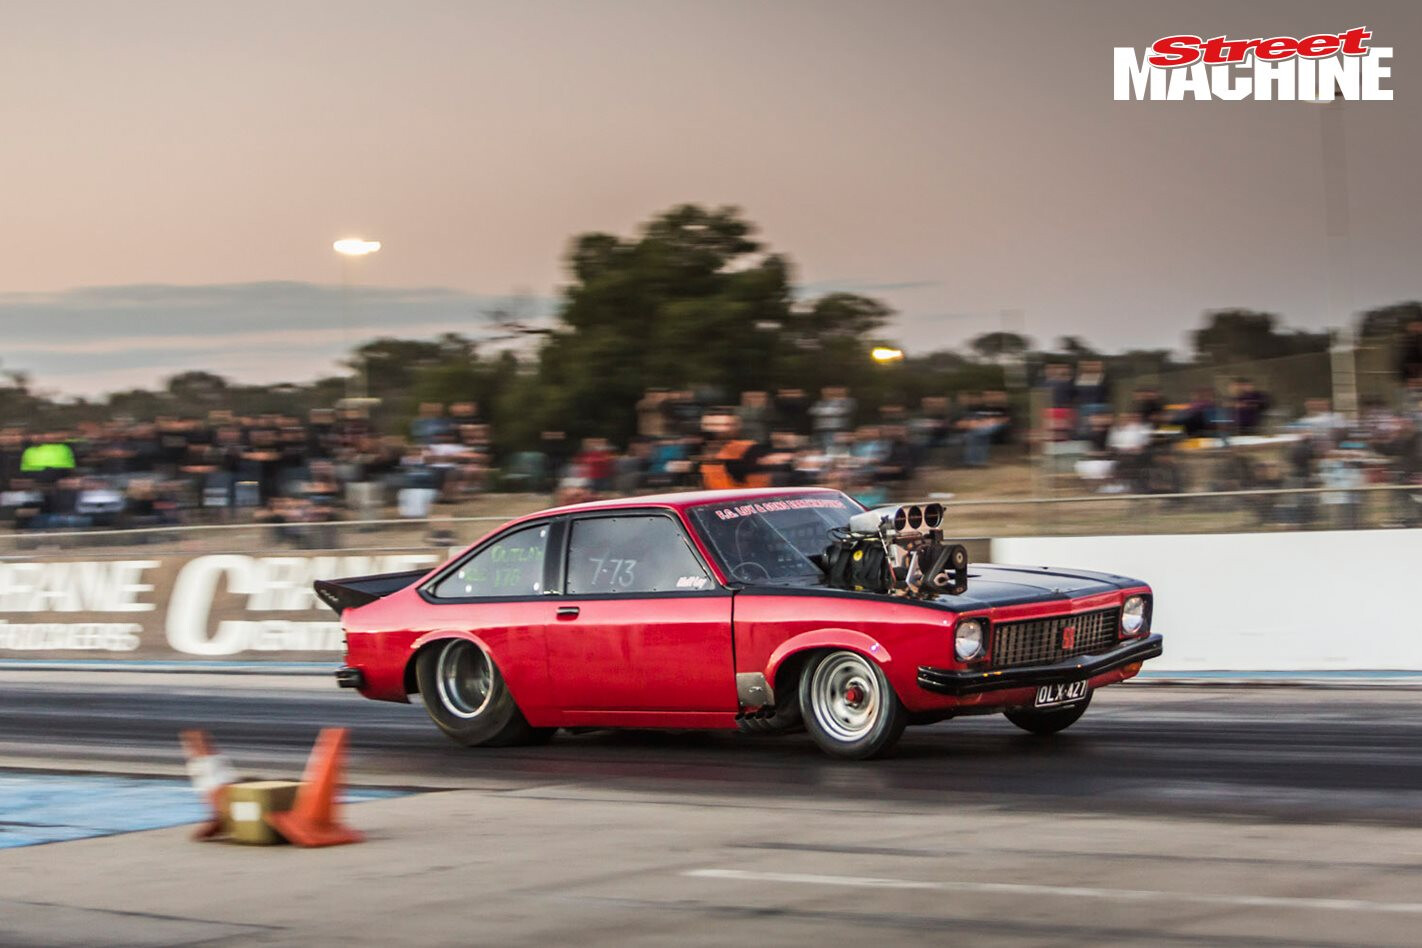 21-year-old races a seven-second blown Torana – Video